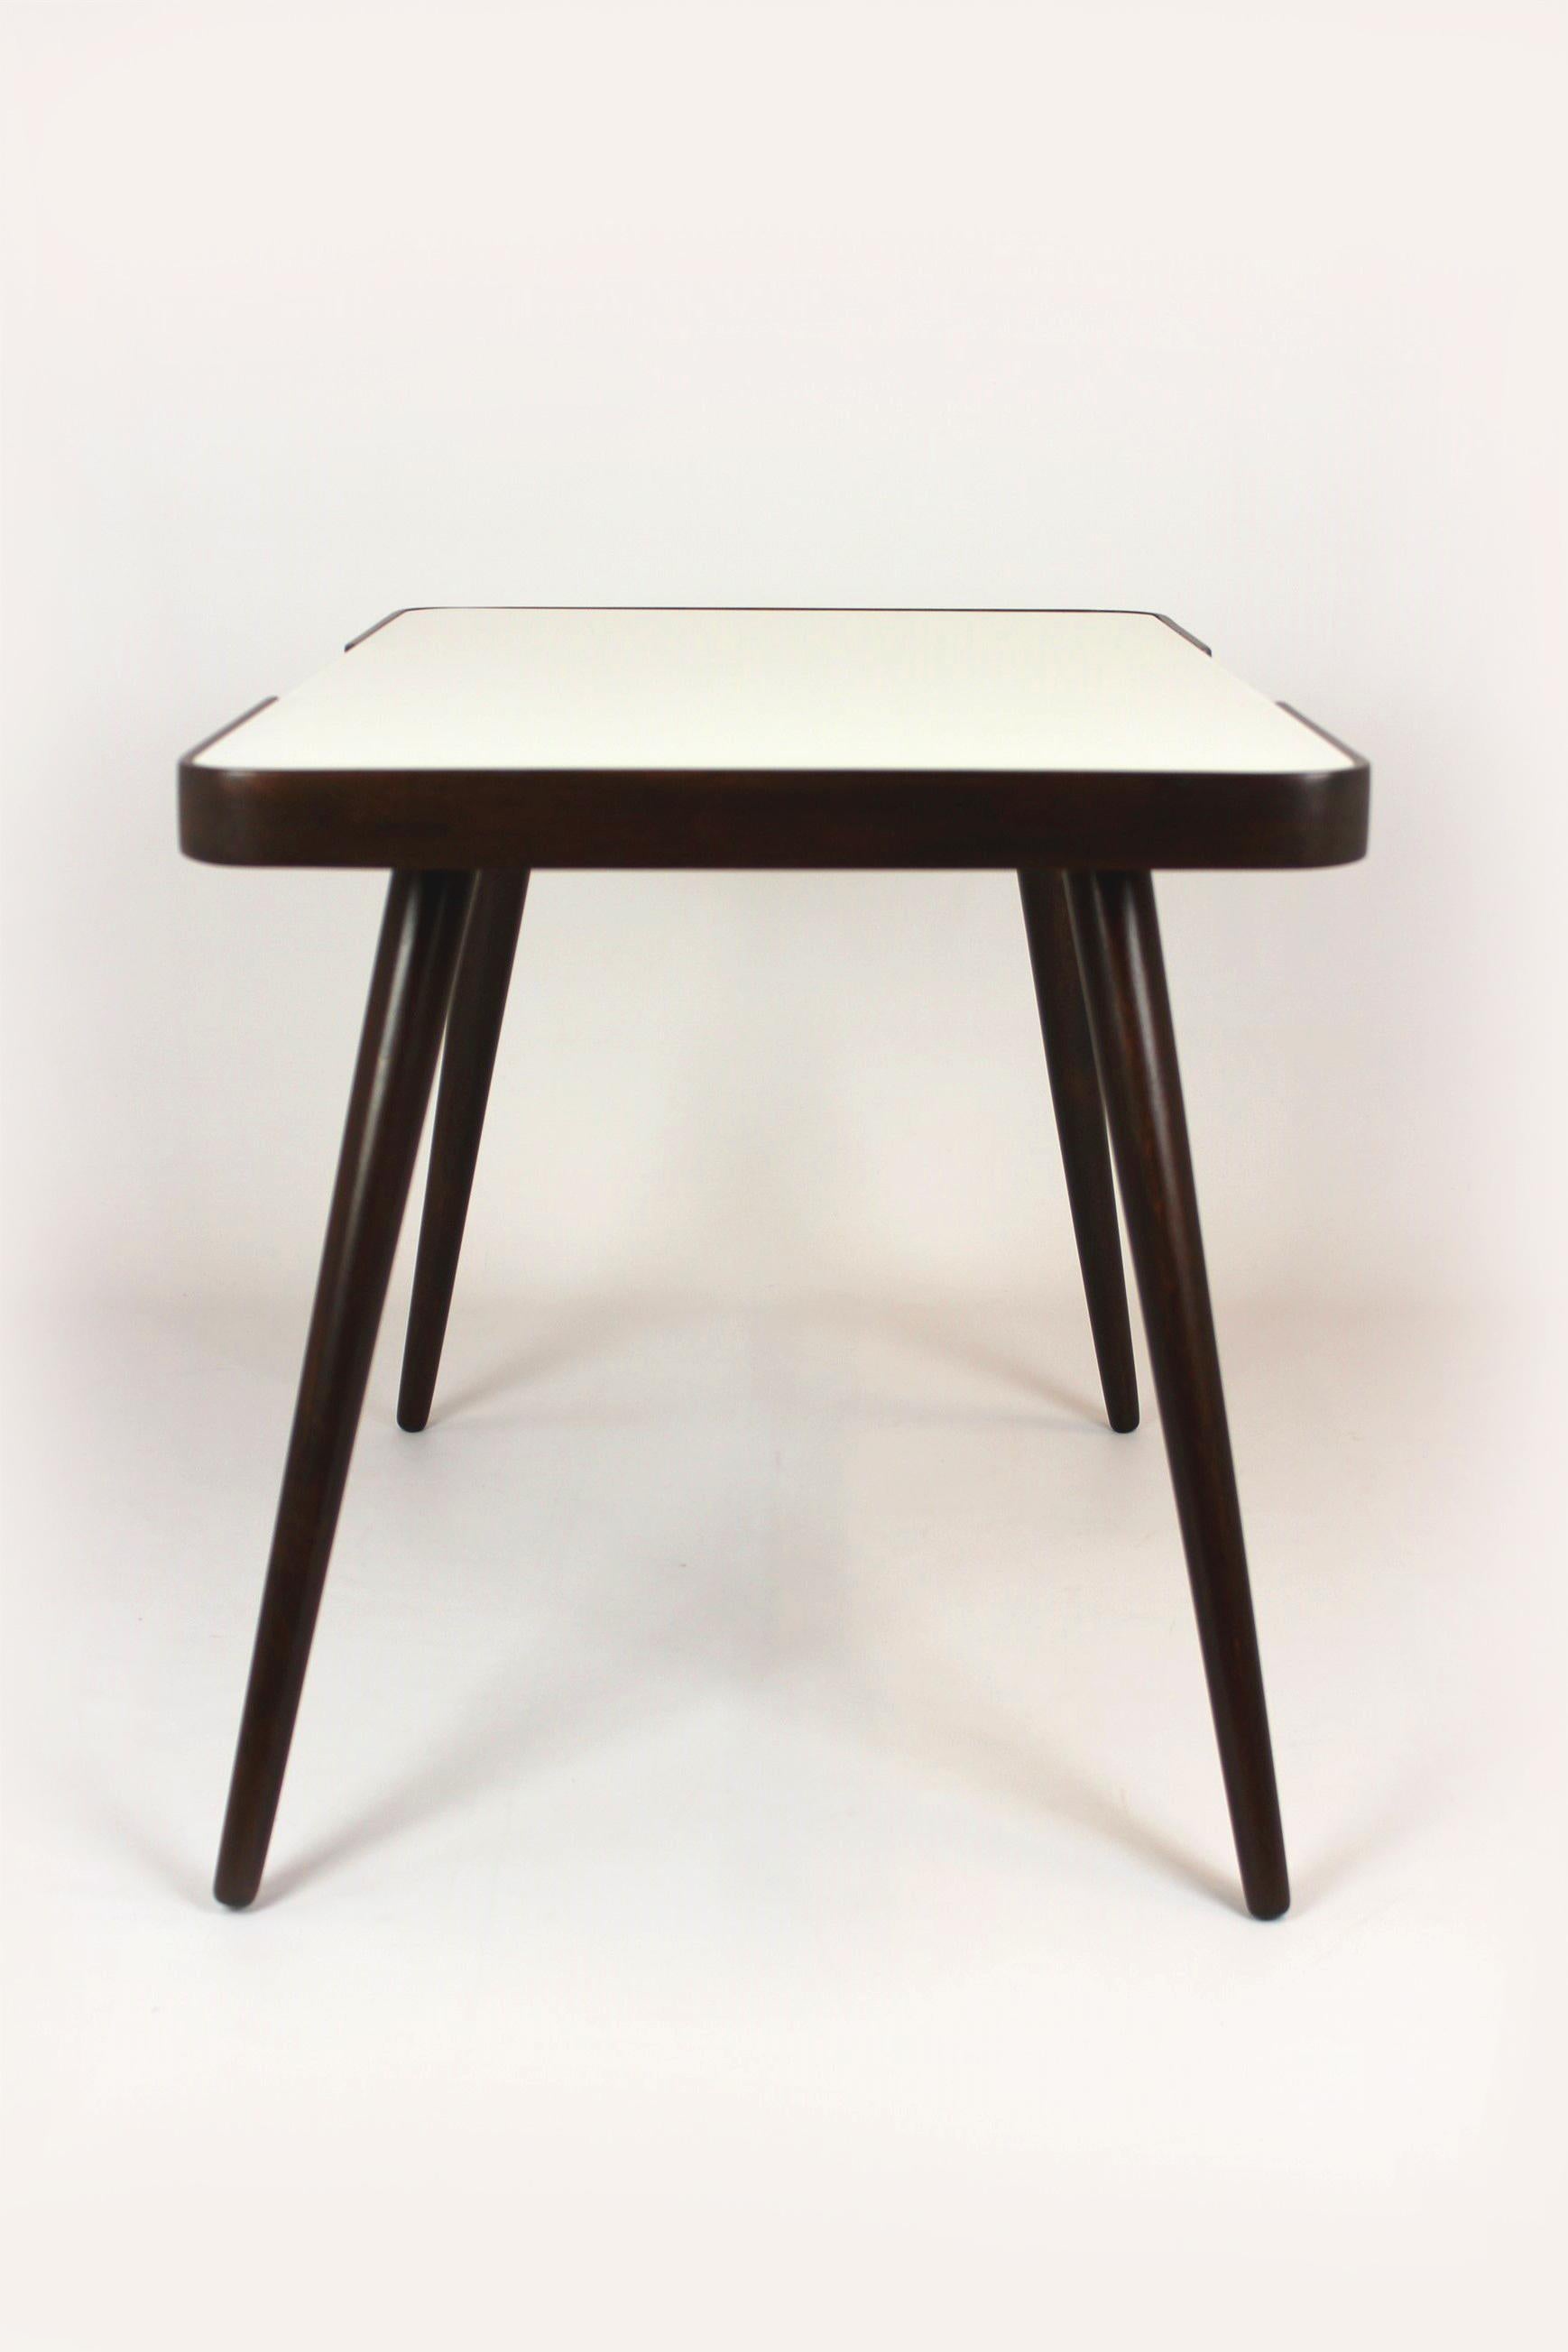 Restored Coffee Table with White Glass Top by J. Jiroutek for Int. Praha, 1960s For Sale 4